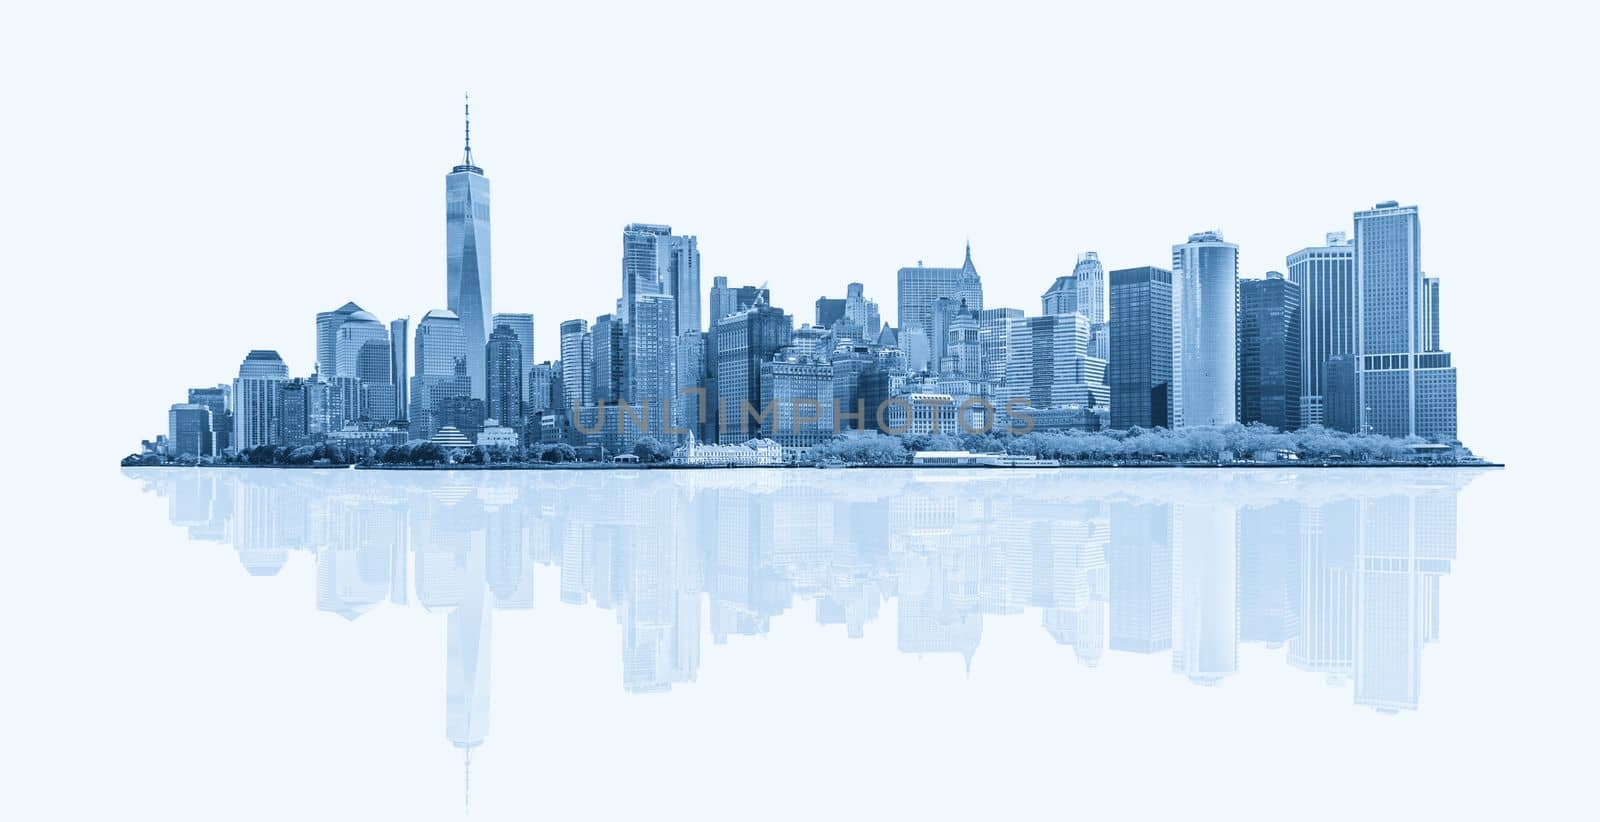 Skyline panorama of downtown Financial District and the Lower Manhattan in New York City, USA. isolated on white background with reflection by Mariakray